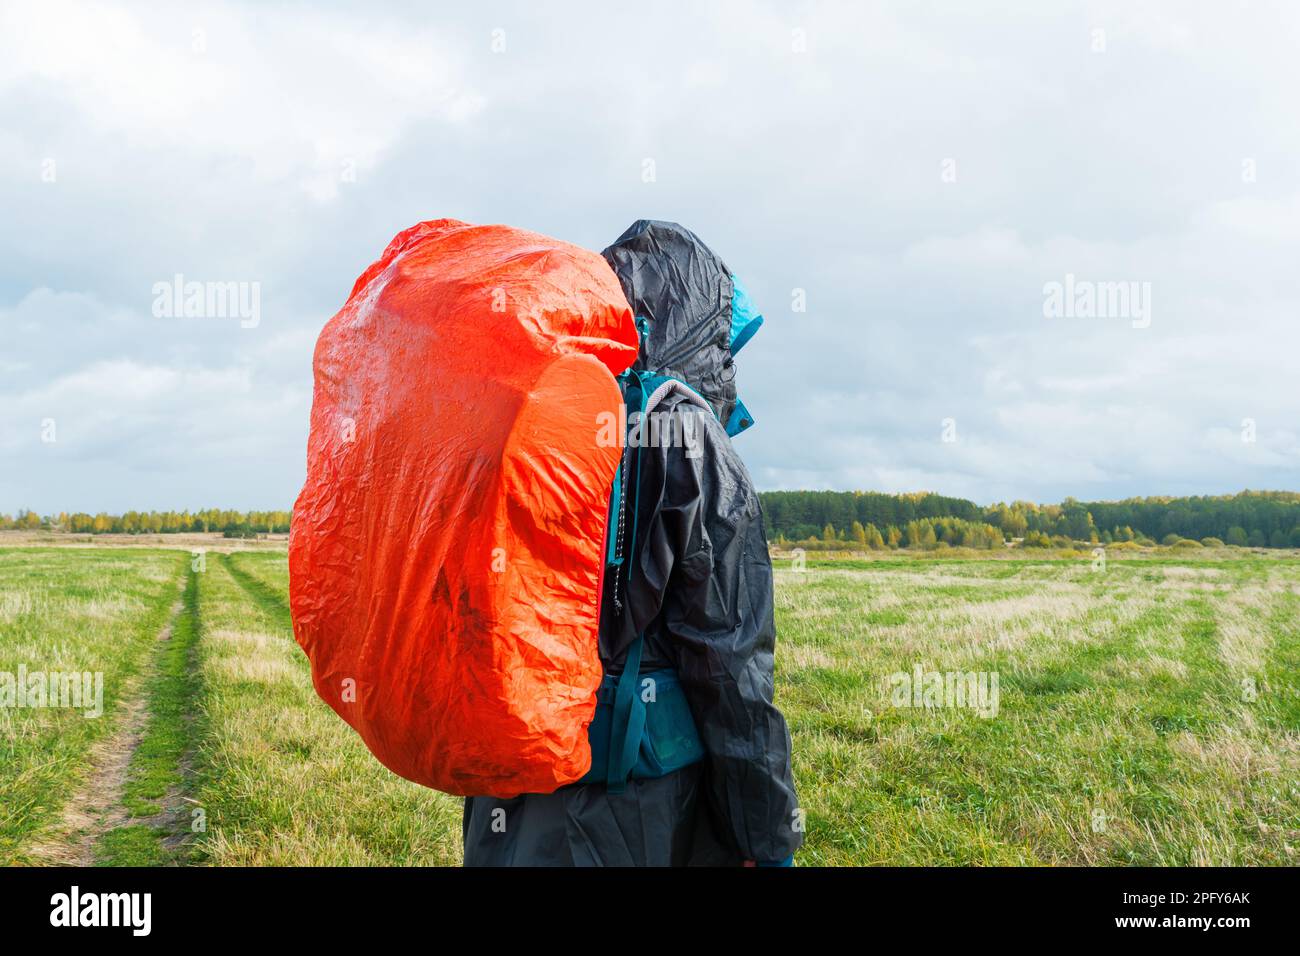 Backpacker on green field. Man hiking with bright red backpack. Autumn rural landscape. Stock Photo